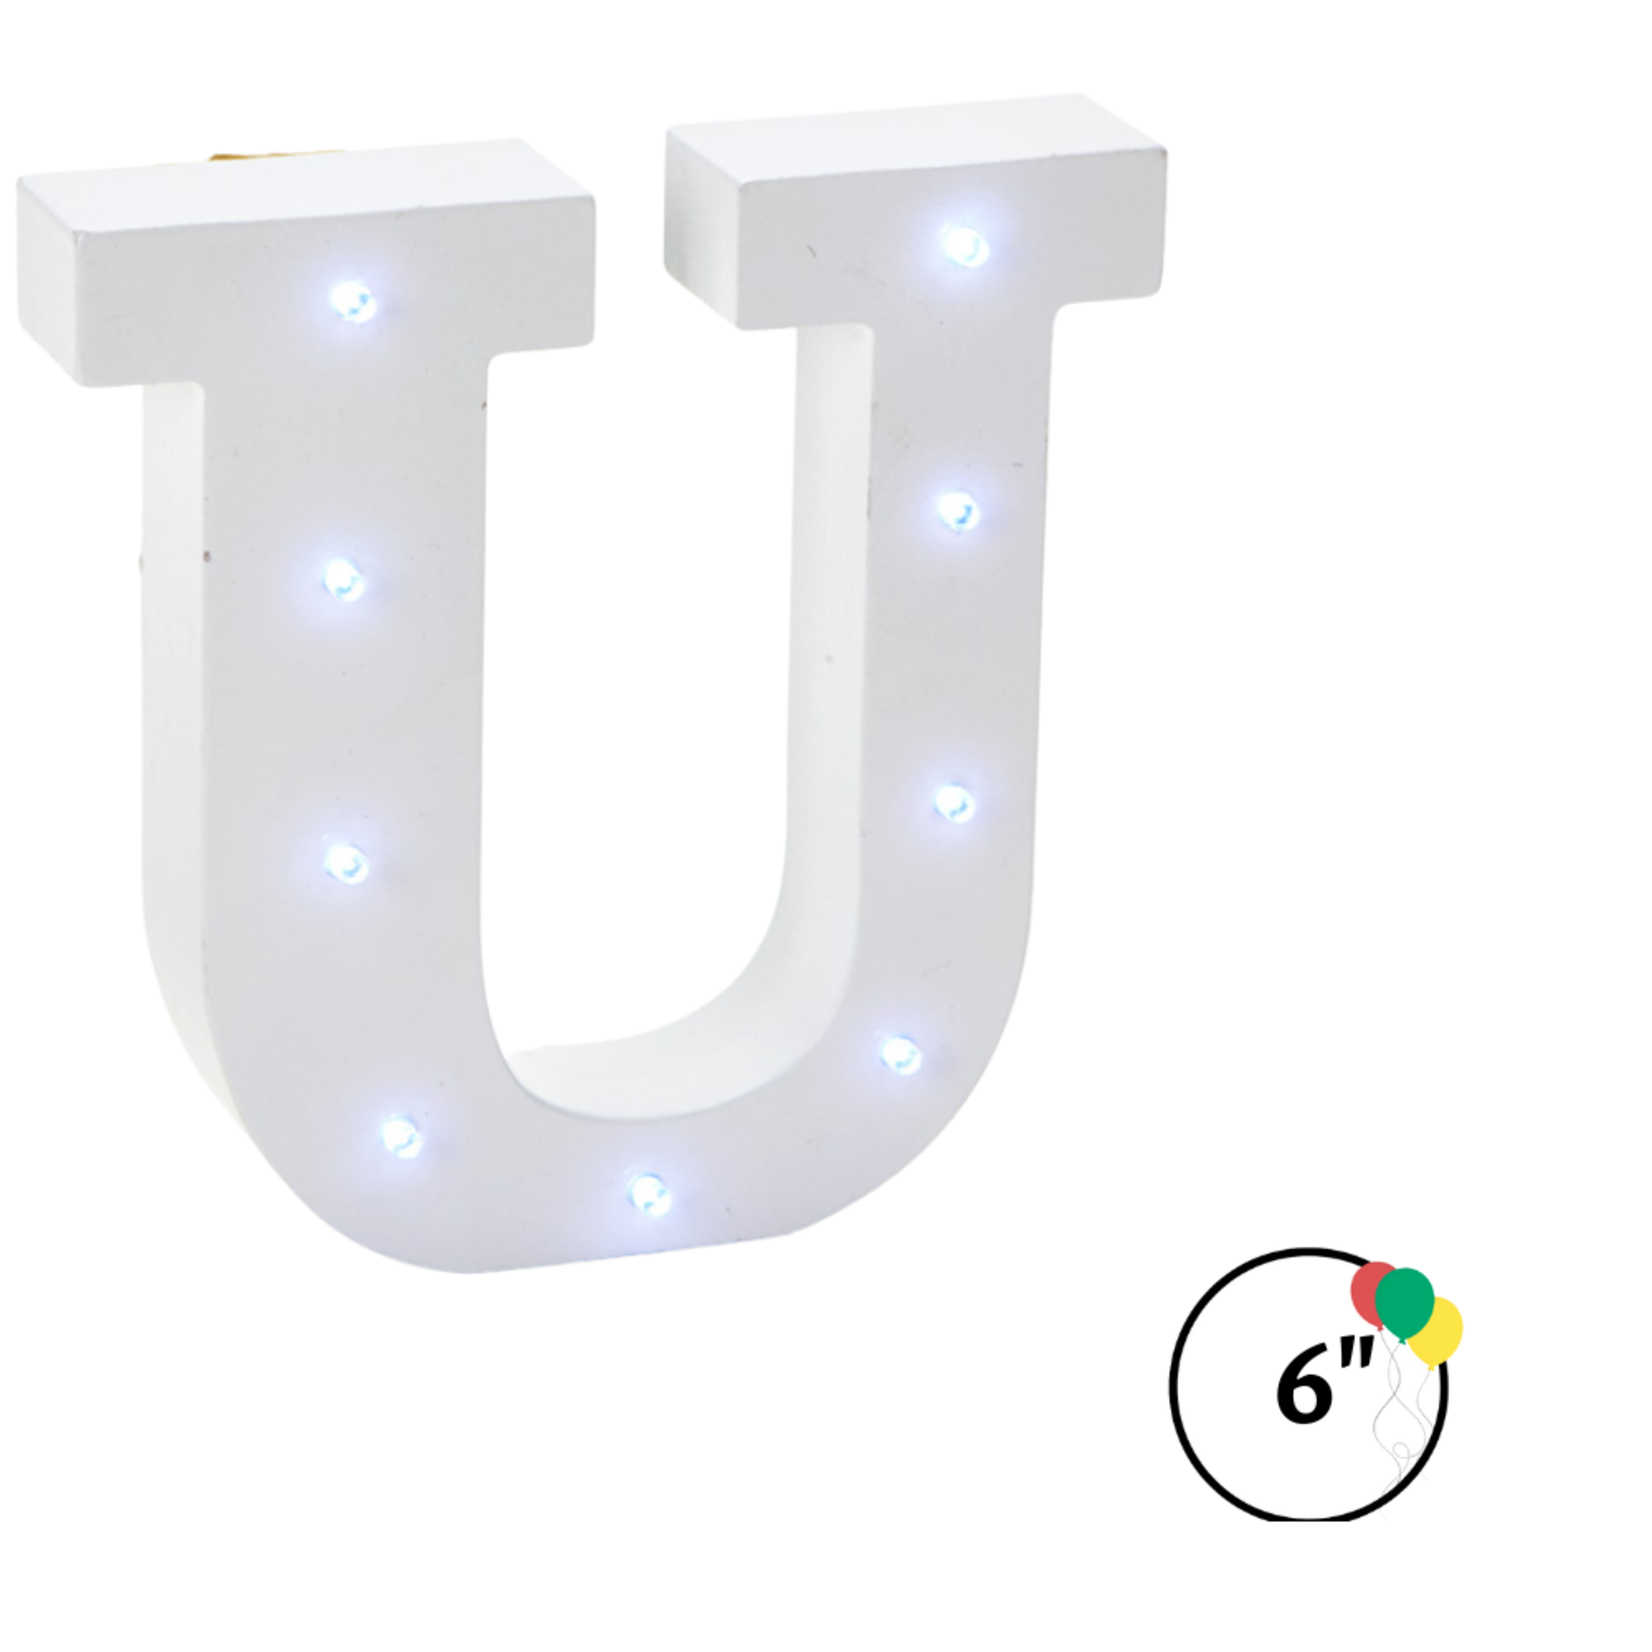 Wooden Vintage LED   Marquee Freestanding Letter U - White